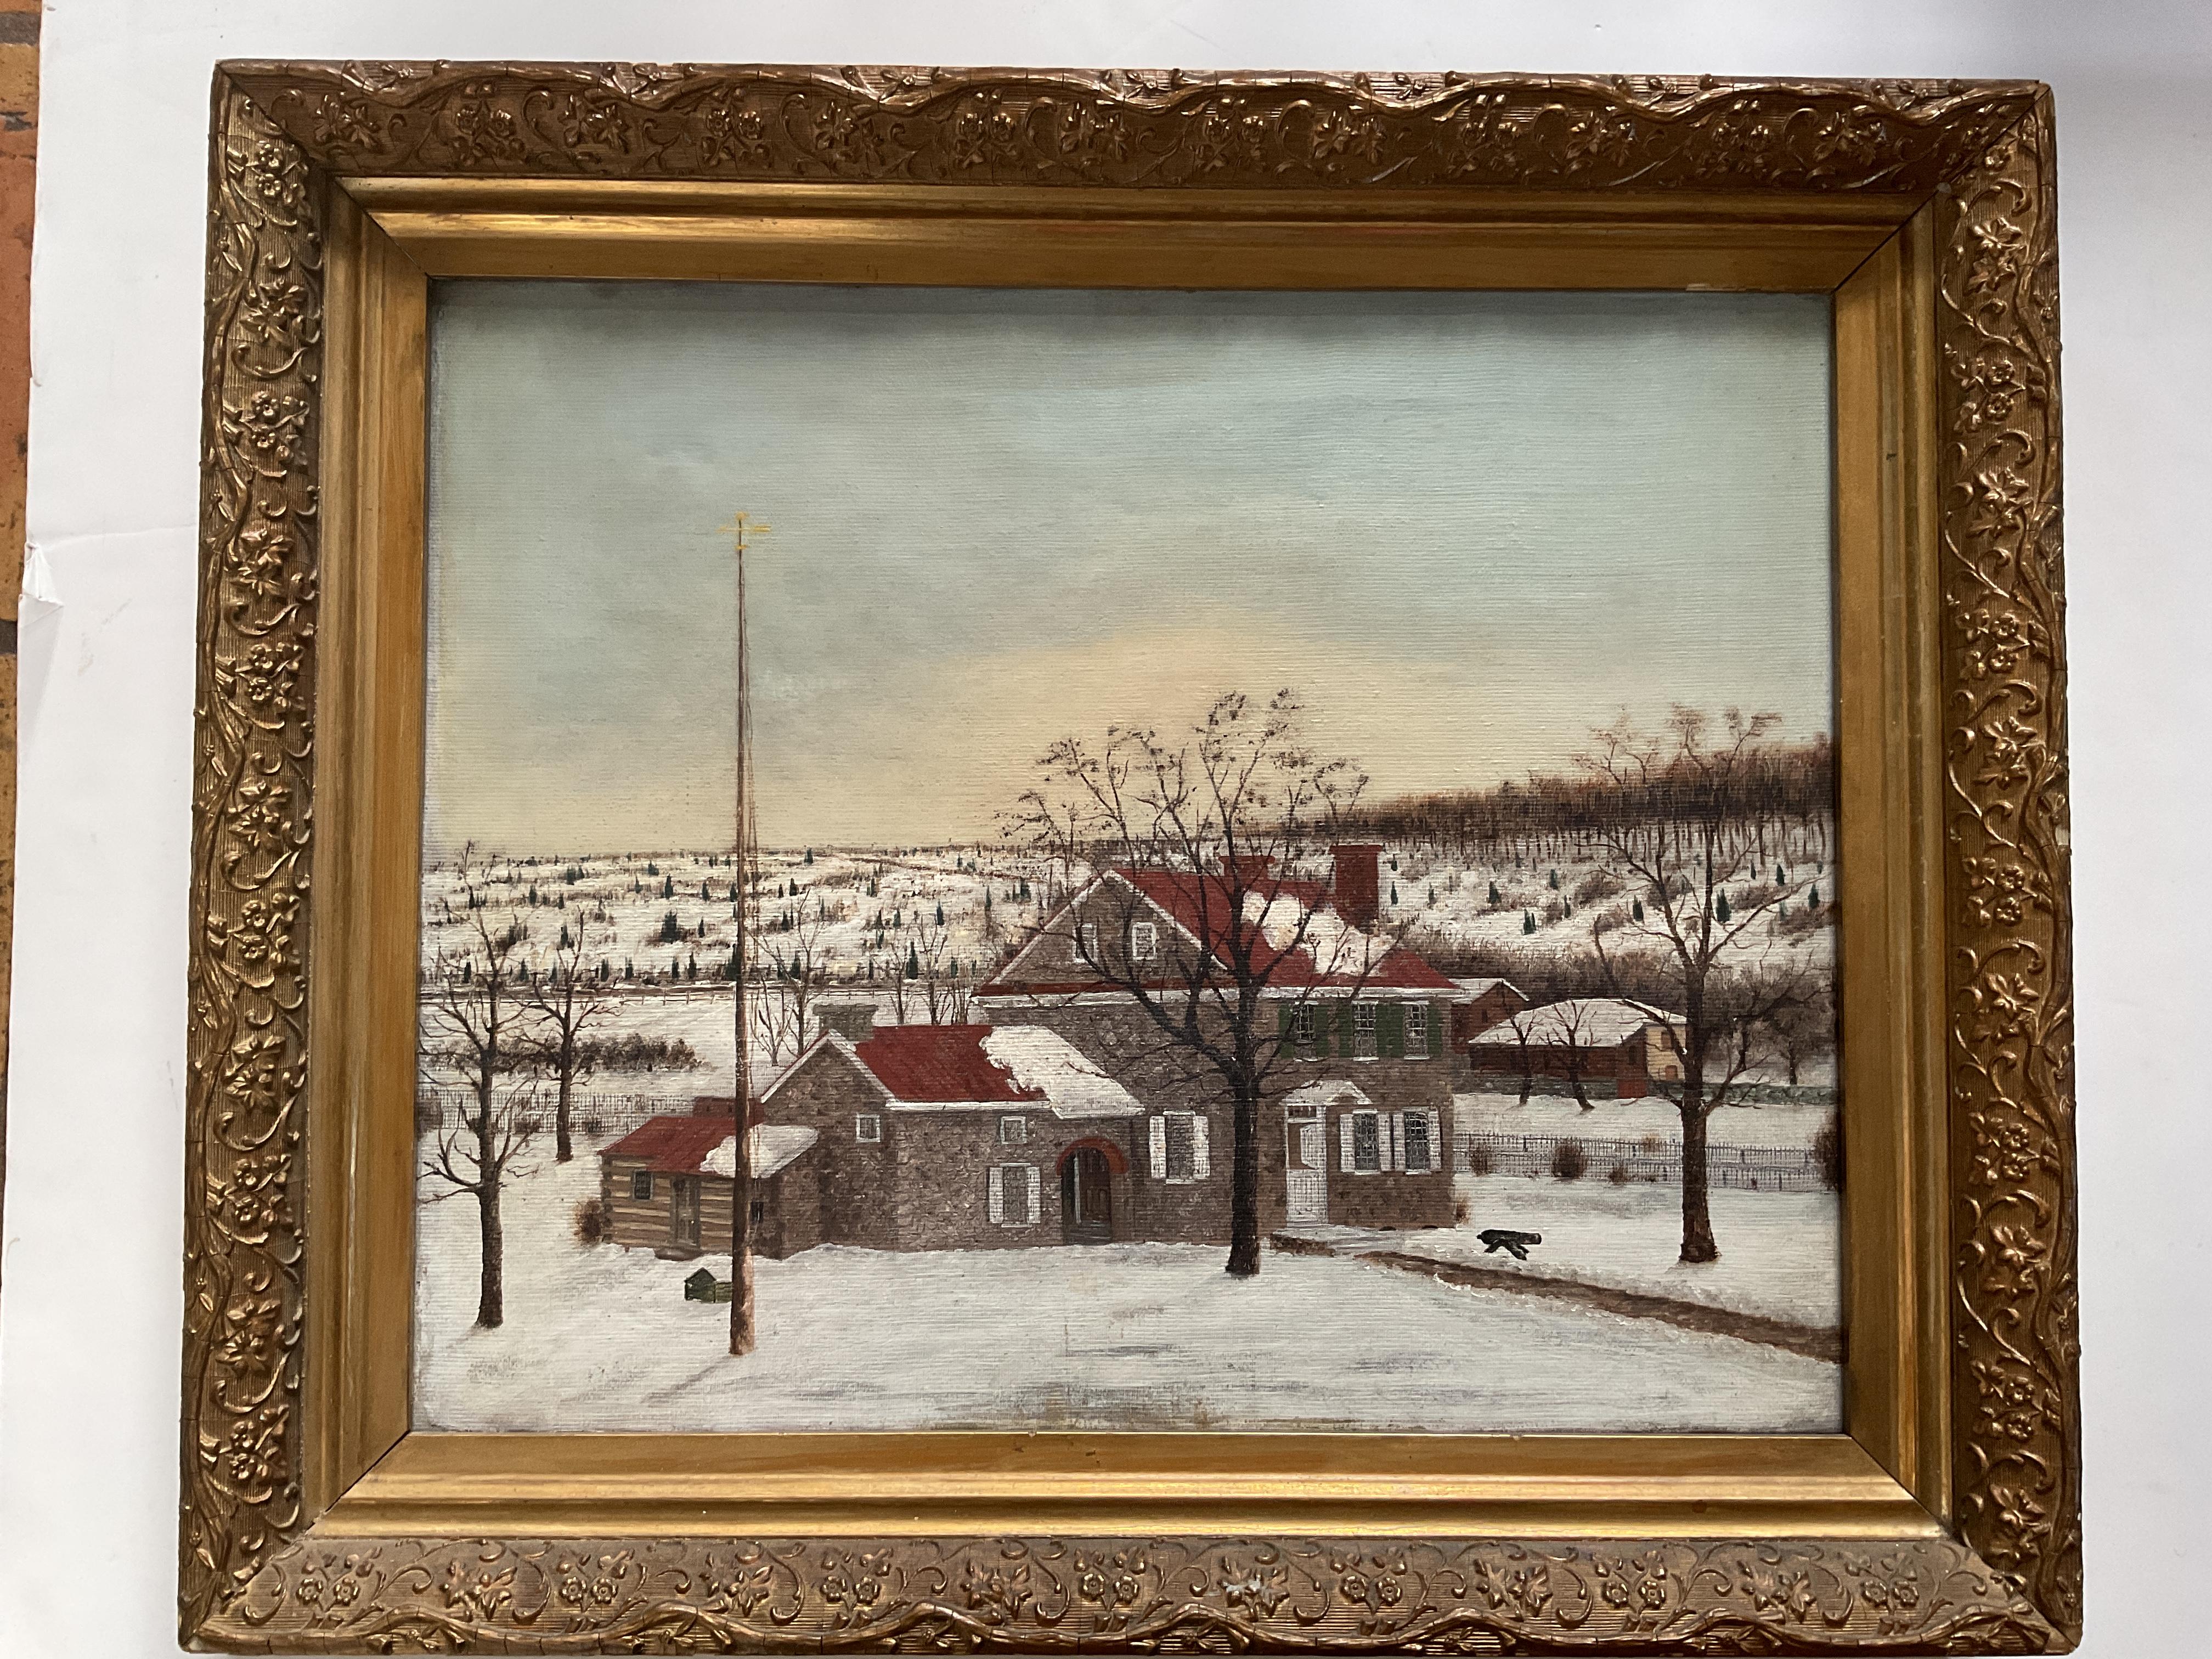 Unknown Landscape Painting - Antique Oil Painting of Washington’s Headquarters, Valley Forge, Pa ca 1890’s